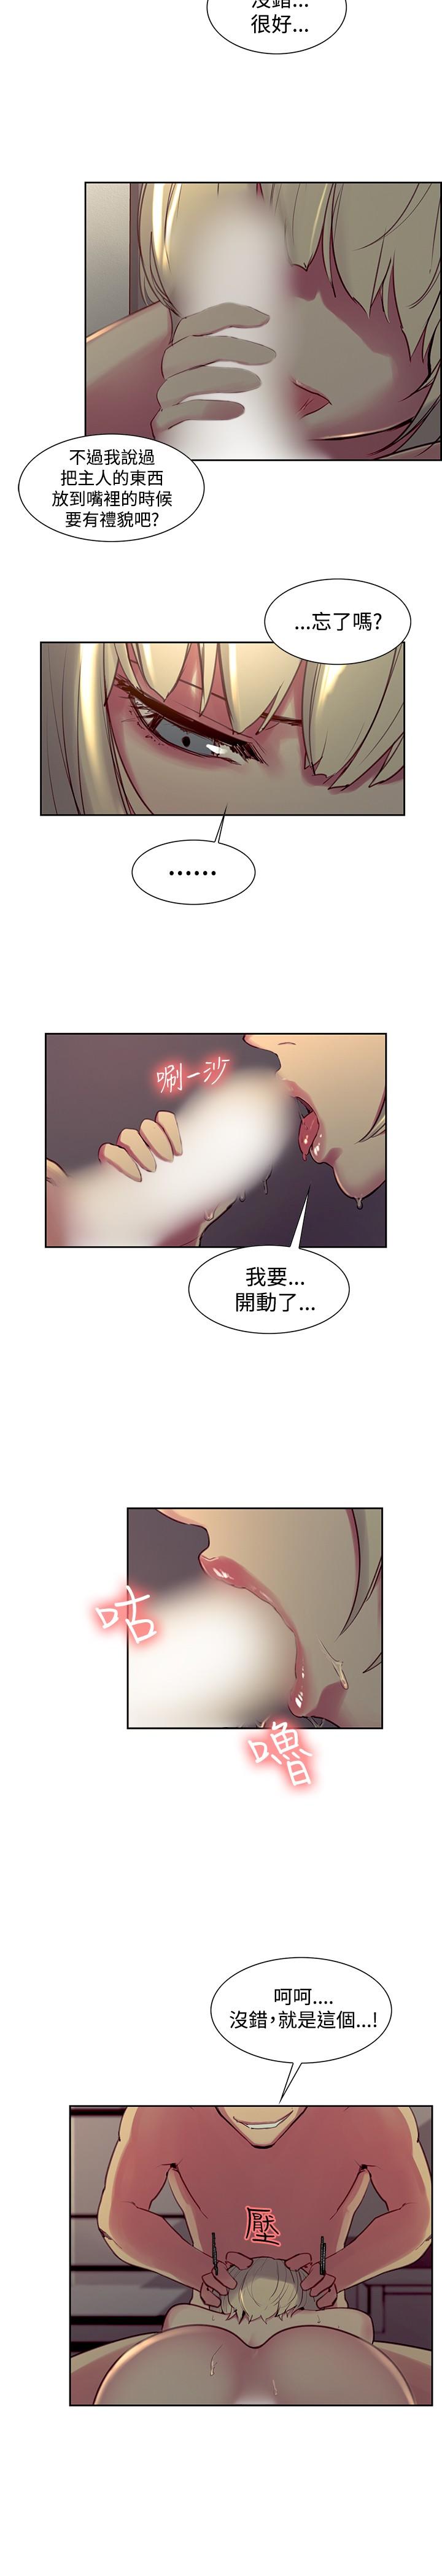 Stretching Domesticate the Housekeeper 调教家政妇 Ch.29~35 Leche - Page 9